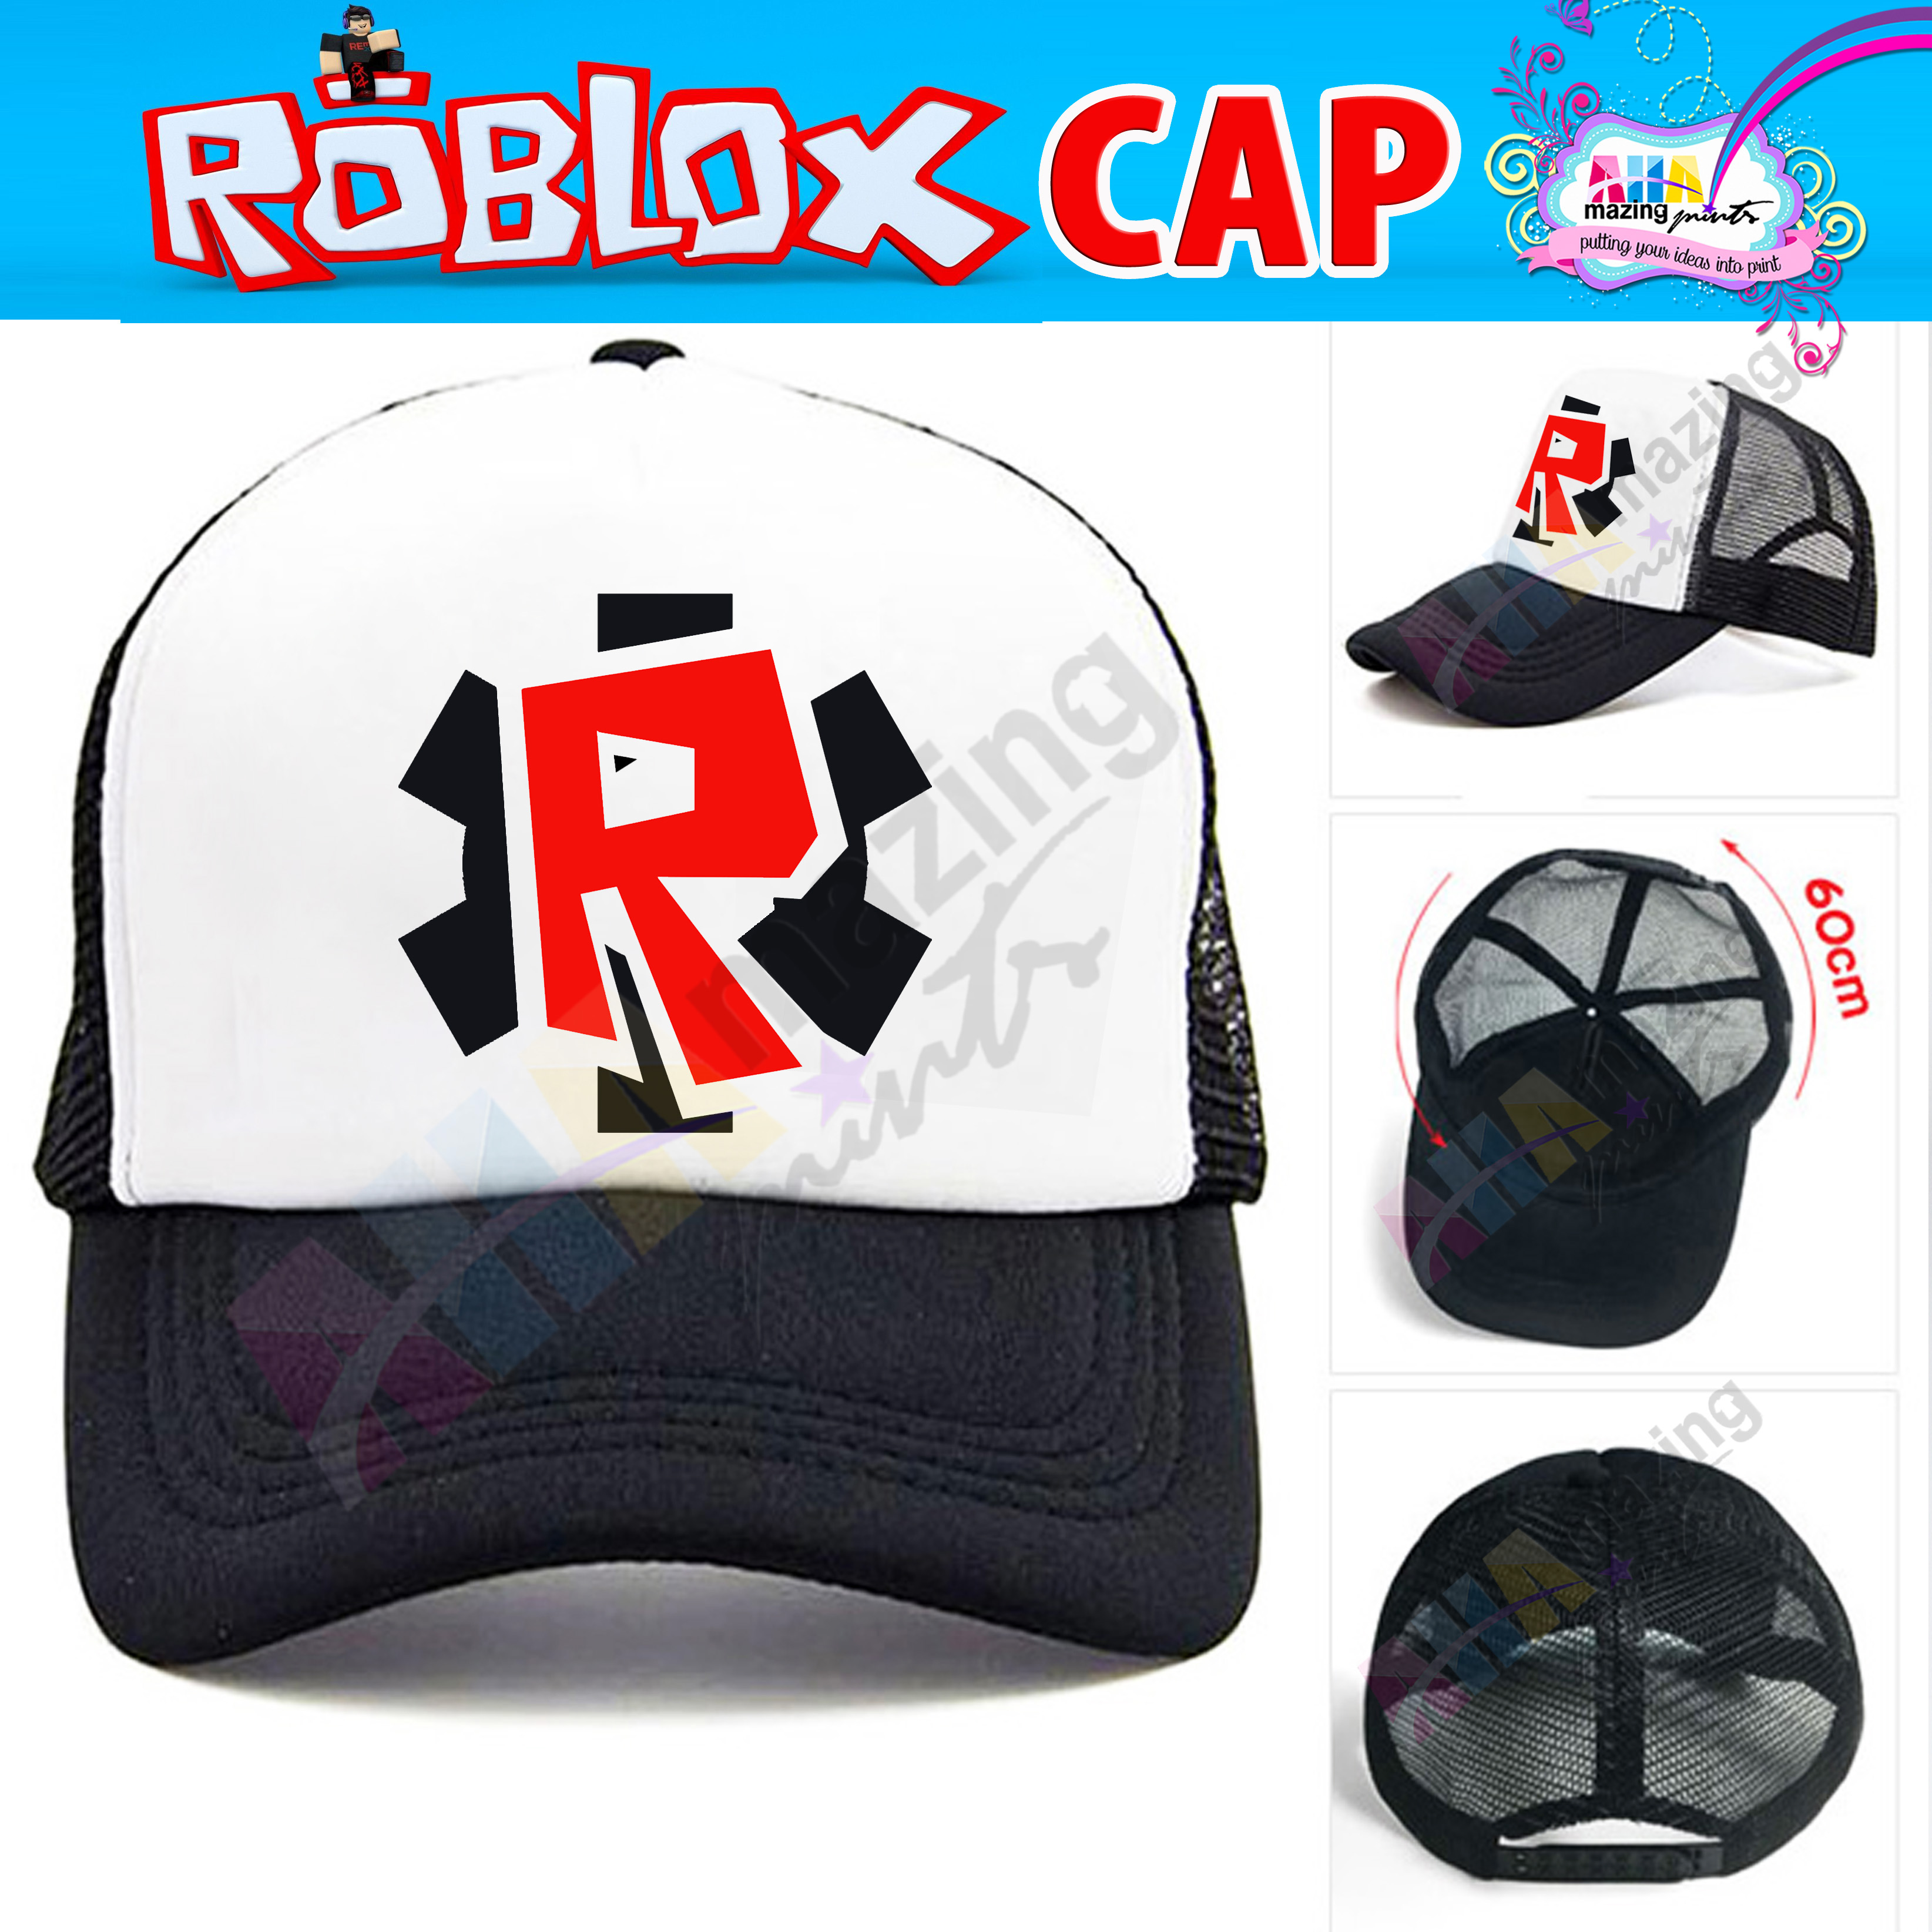 Roblox Cap Gear Black One Size Only Free Size Only Pls Read Description Fashion Boys Girls Unisex Statement Casual Custom Children Wear Cute Trending Viral Ootd High Quality Birthday Christmas Ninang Ninong - smallest head in roblox free